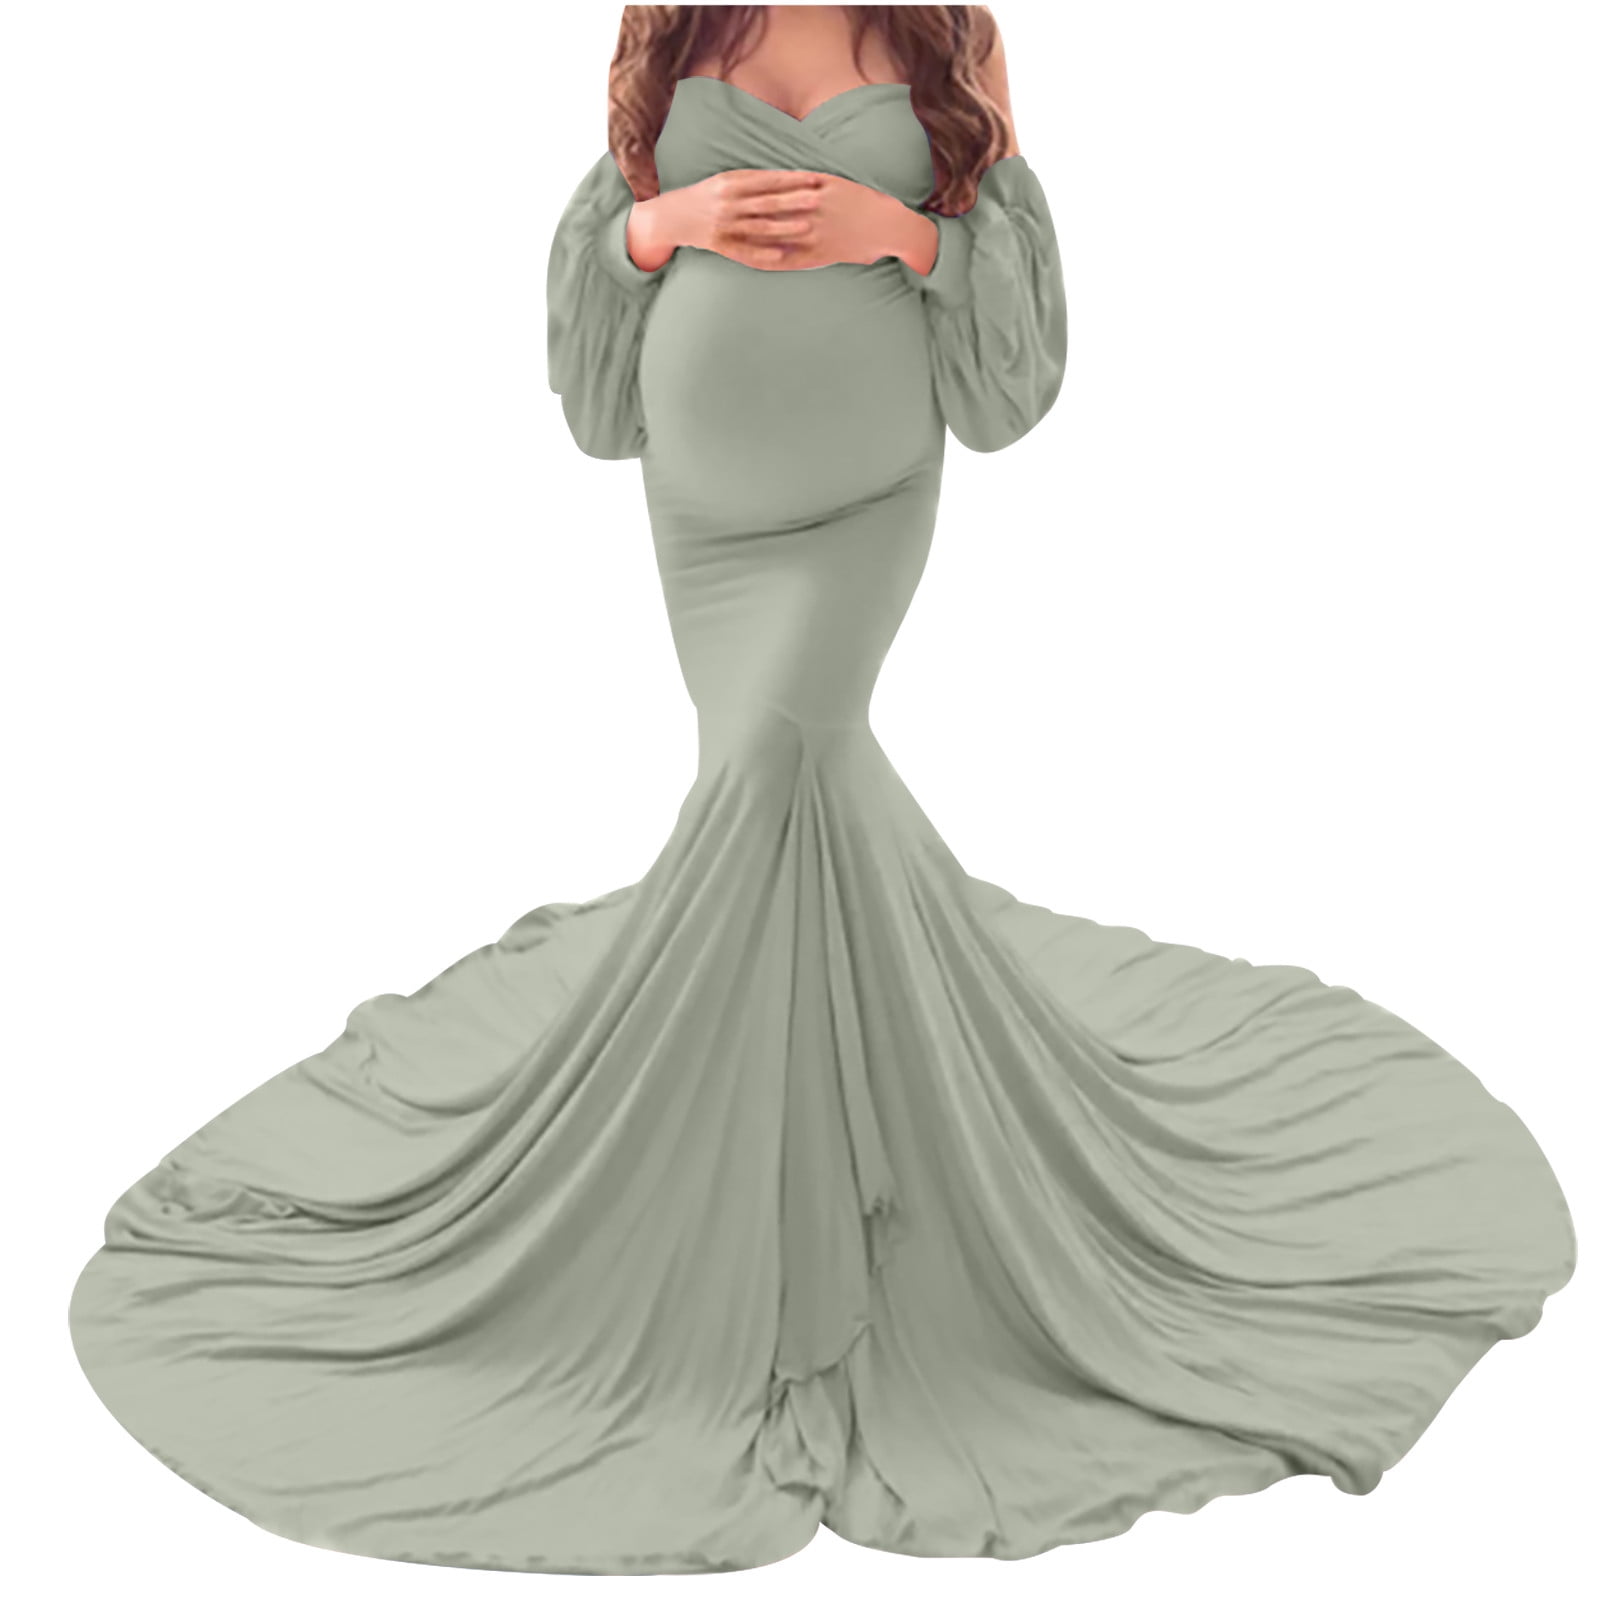 gakvbuo Maternity Dress For Women Plus Size Summer Baby Shower Pregnancy Dresses Photoshoot Clothing Pregnants Sexy Photography Props Off Shoulder Lo 624558b8 72b9 4ac8 9c71 3c818db9fdf9.c3da5de4d1b950c319f2fbd6f7ae105d